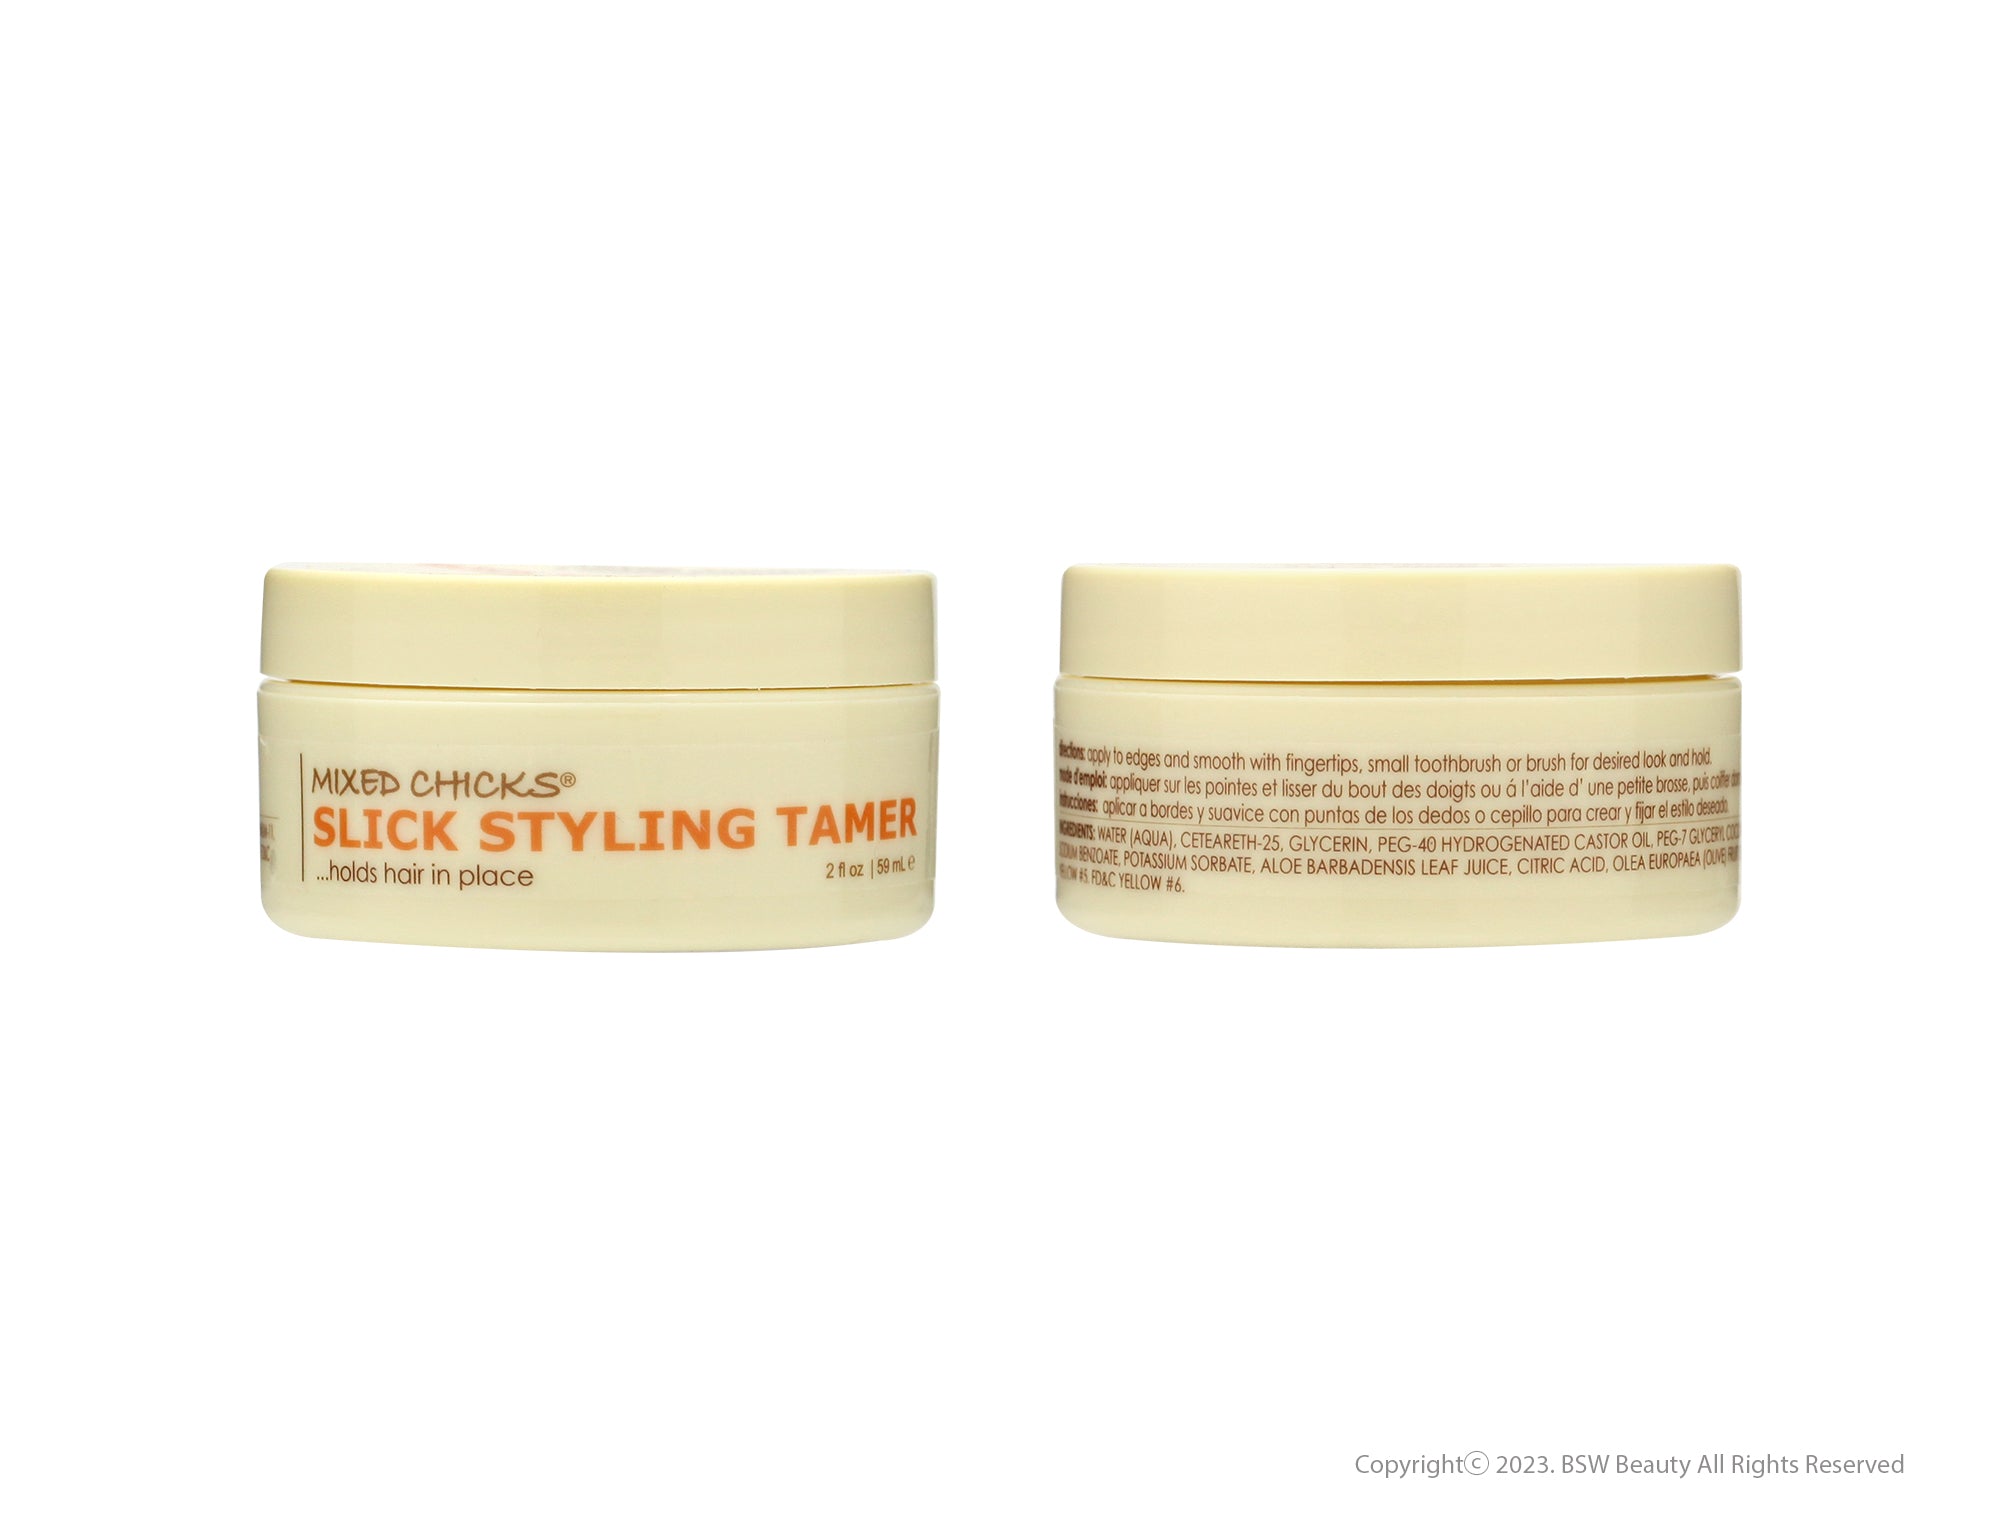 MIXED CHICKS SLICK STYLING TAMER WITH CASTOR & COCONUT OIL 2OZ